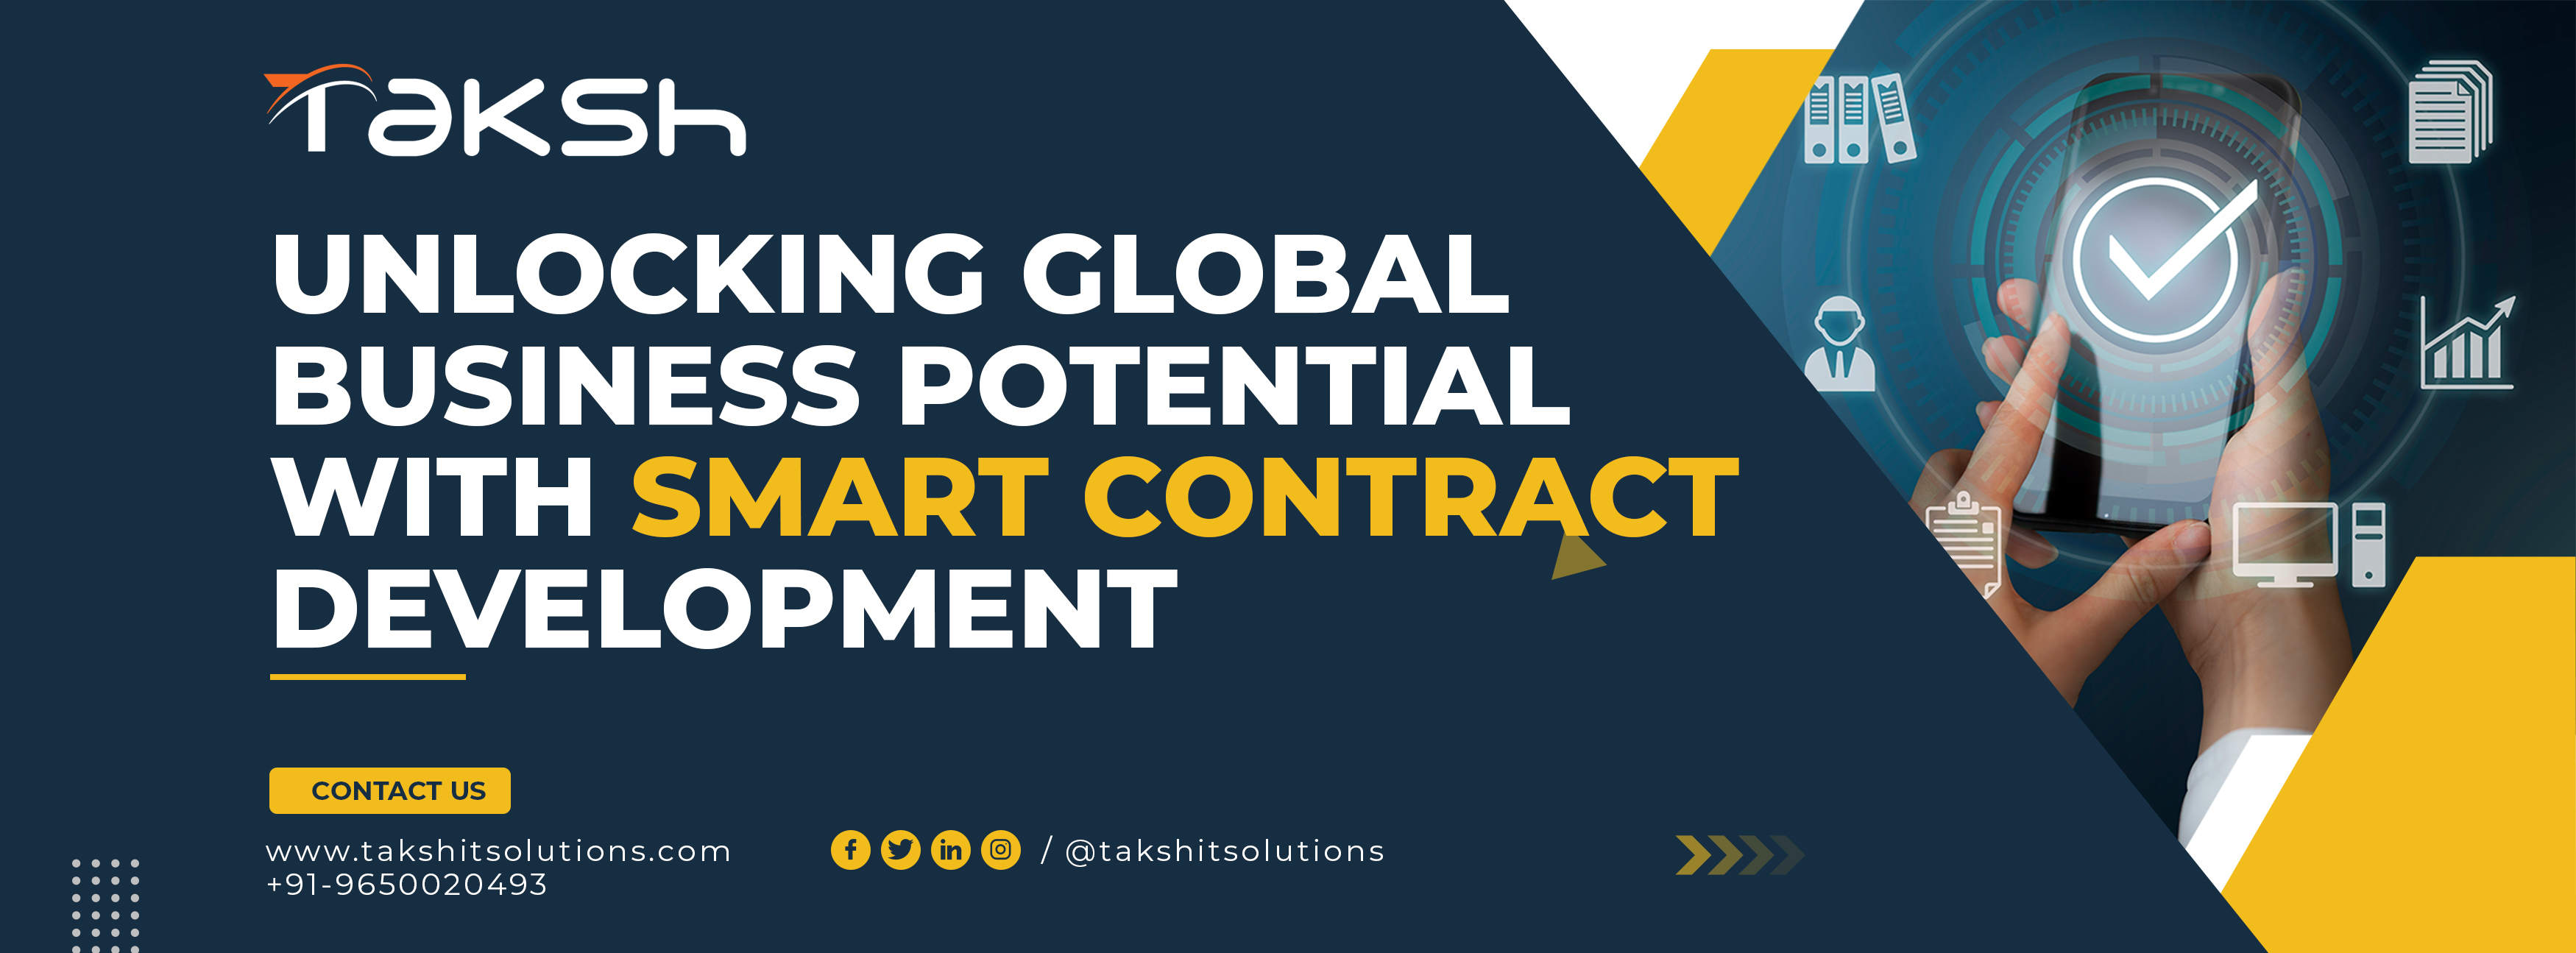 Unlocking Global Business Potential with Smart Contract Development